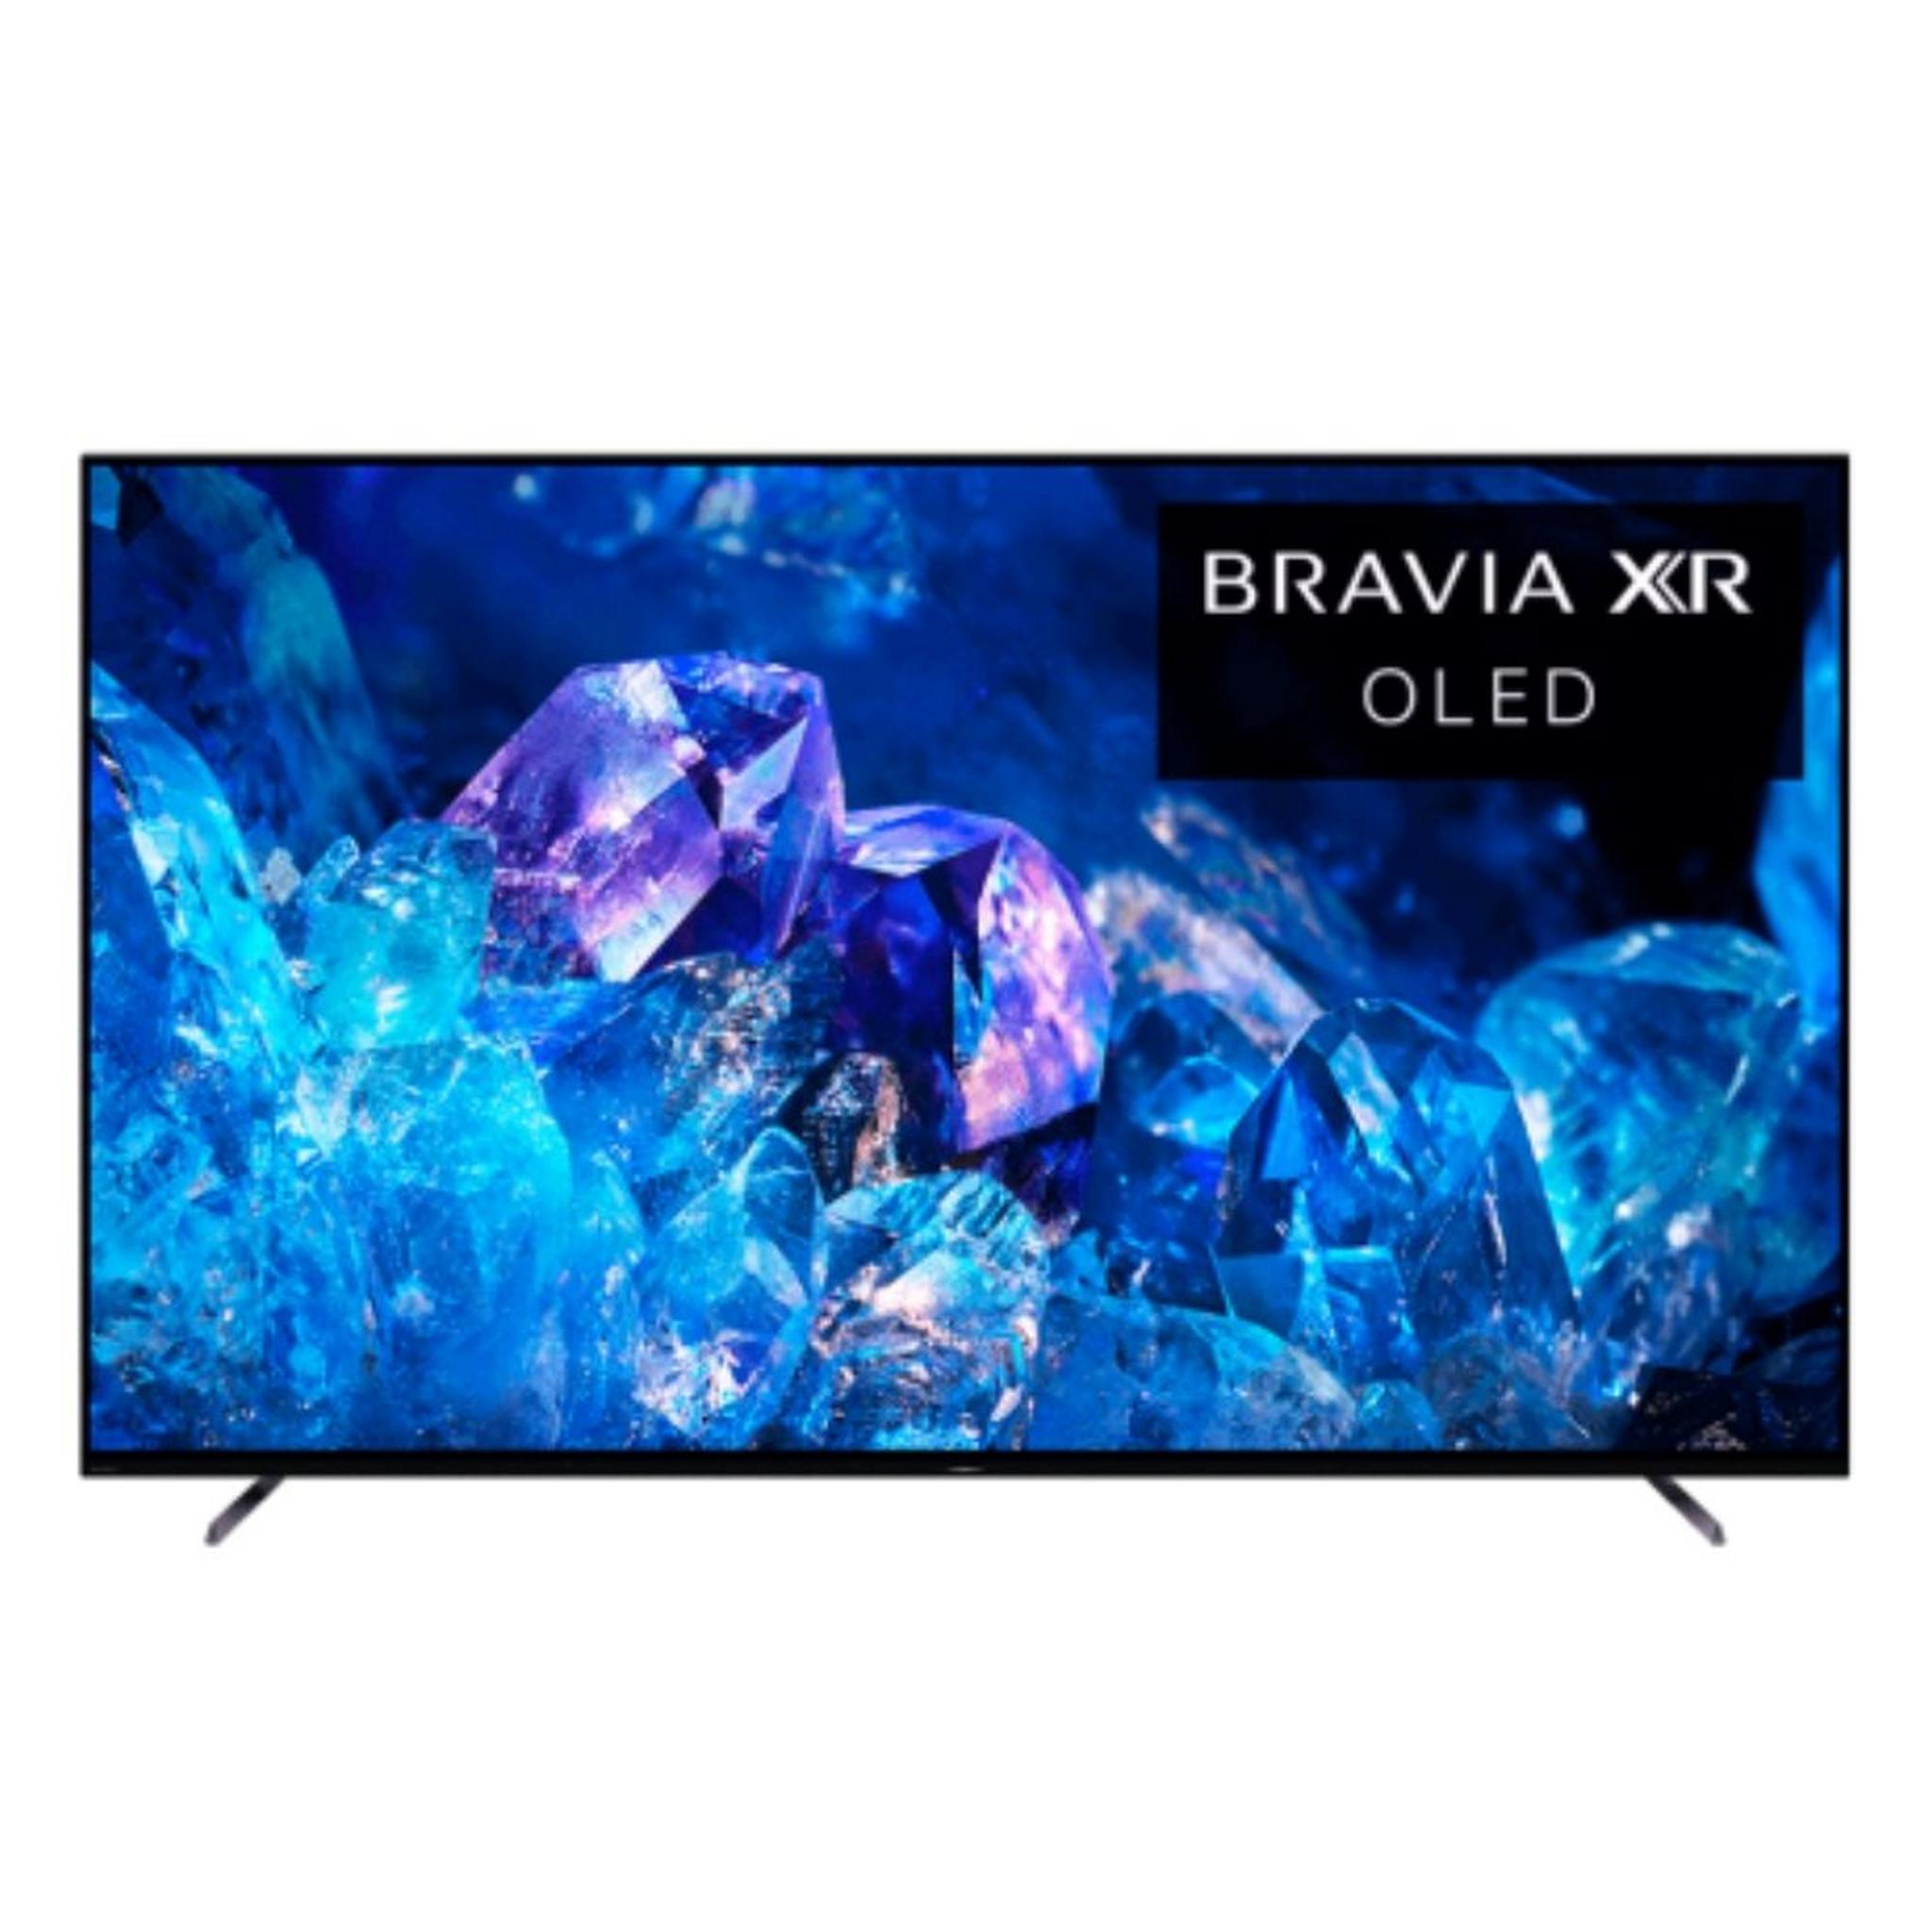 Sony Smart TV 77 inch OLED 4K HDR (XR-77A80)